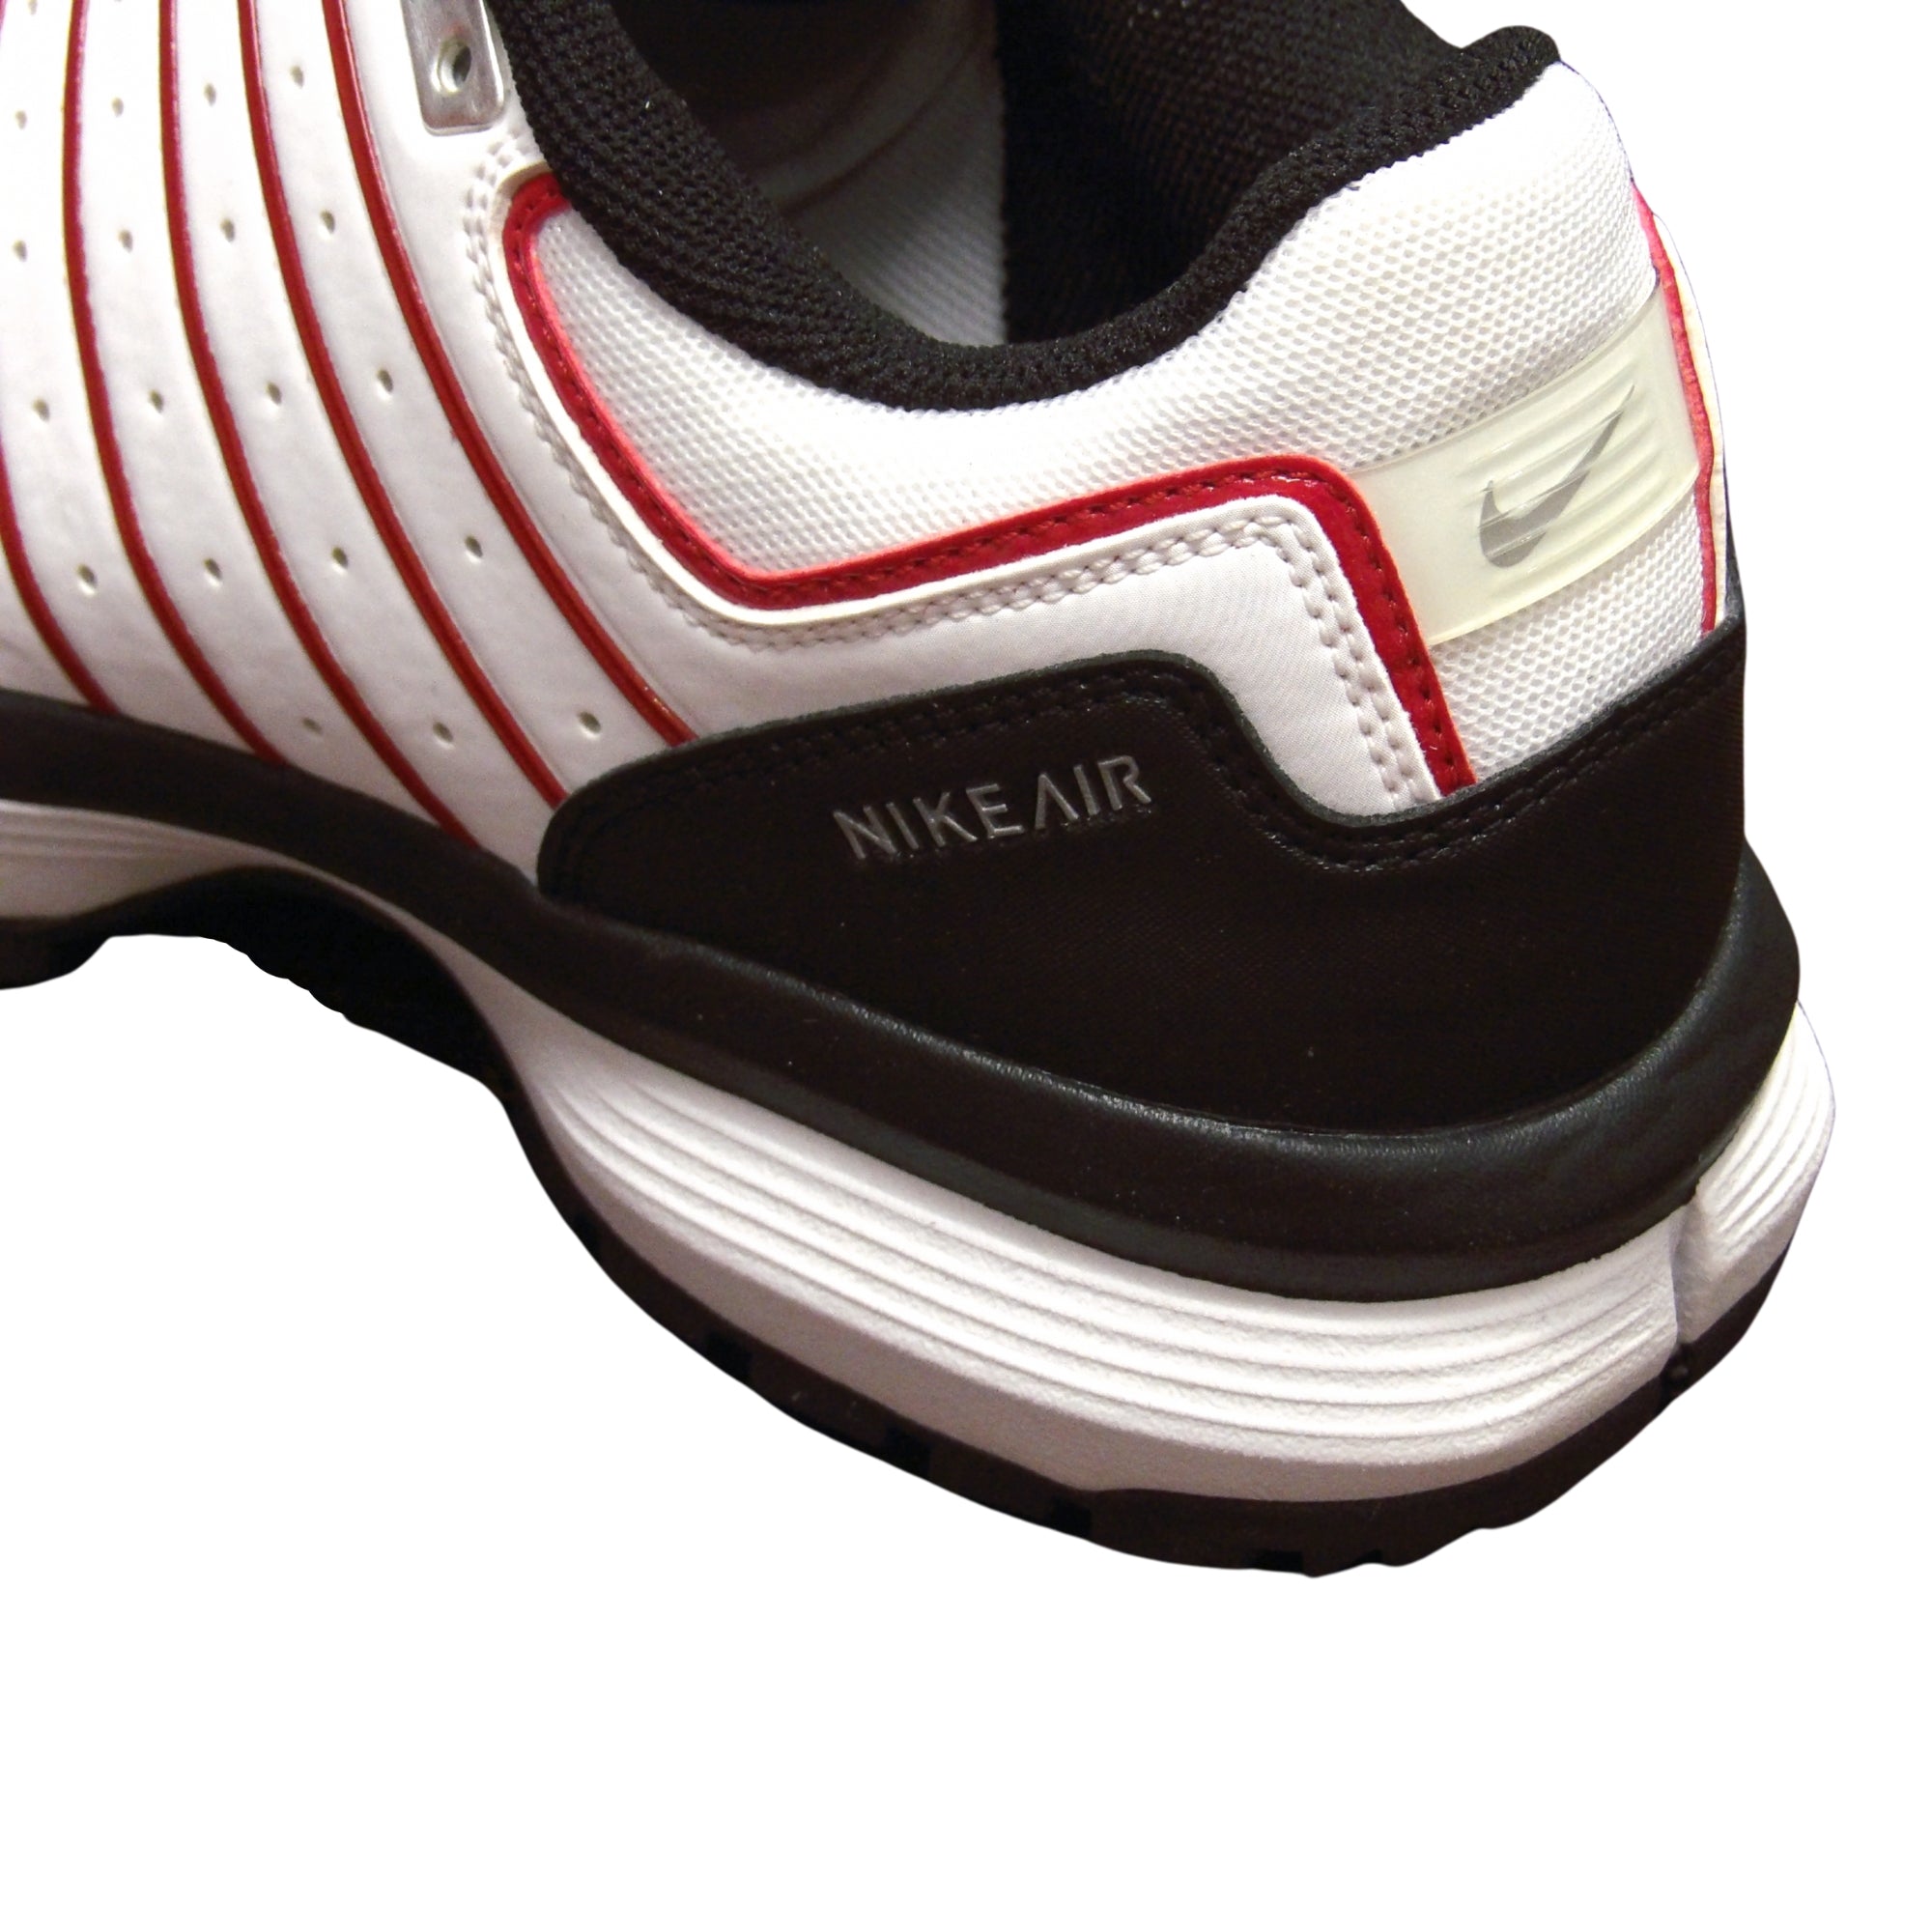 Nike Cricket Shoes, Model Air Max Go - White/Red